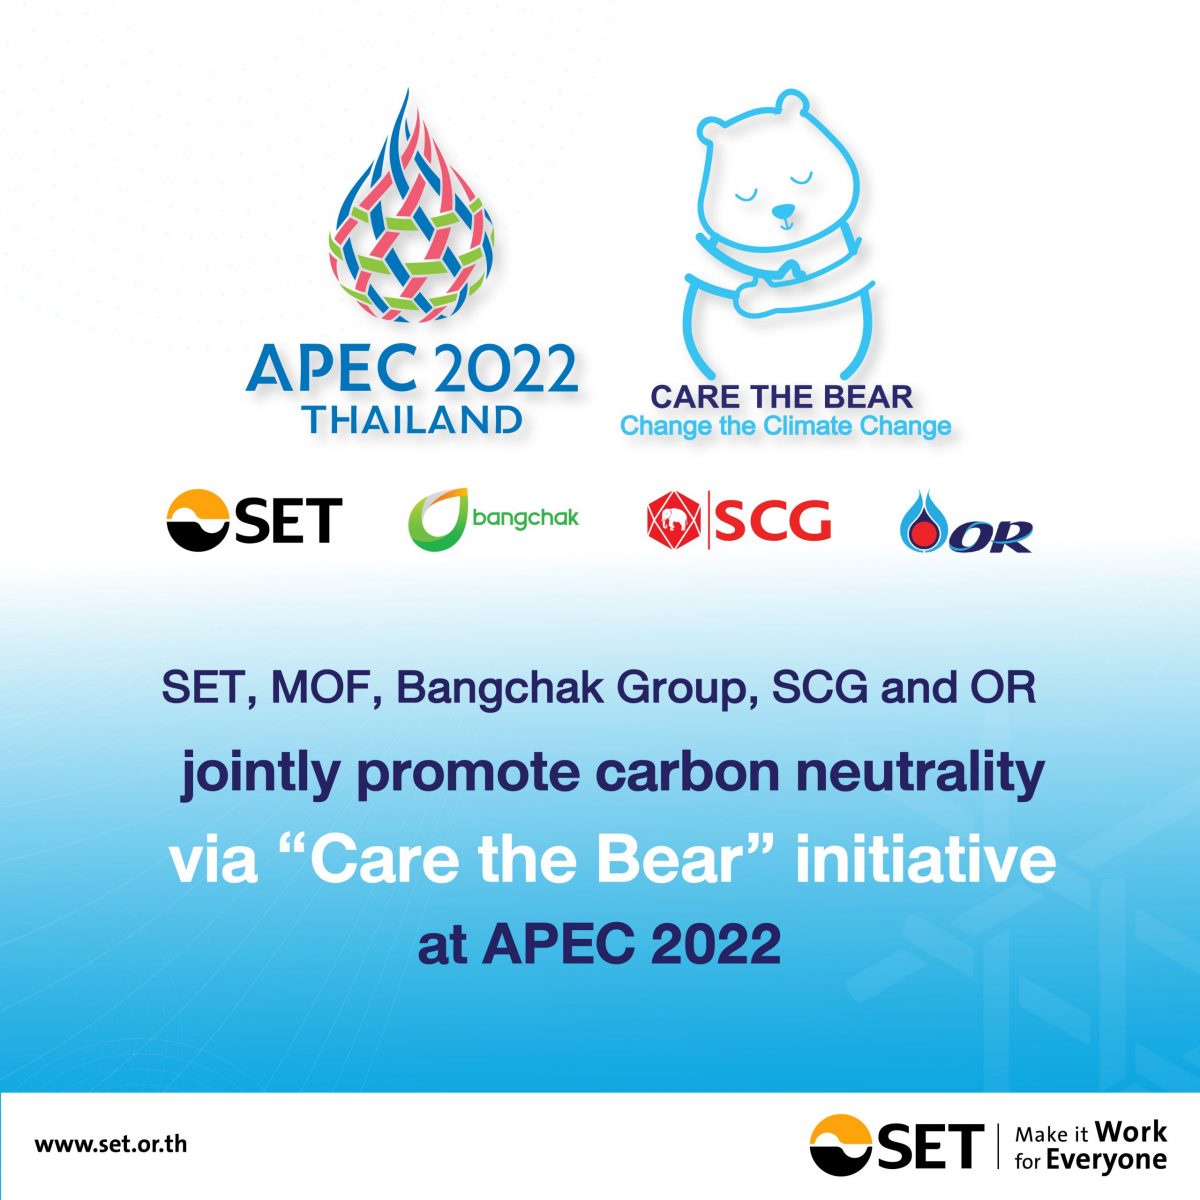 SET, MOF, Bangchak Group, SCG and OR jointly promote carbon neutrality via Care the Bear initiative at APEC 2022